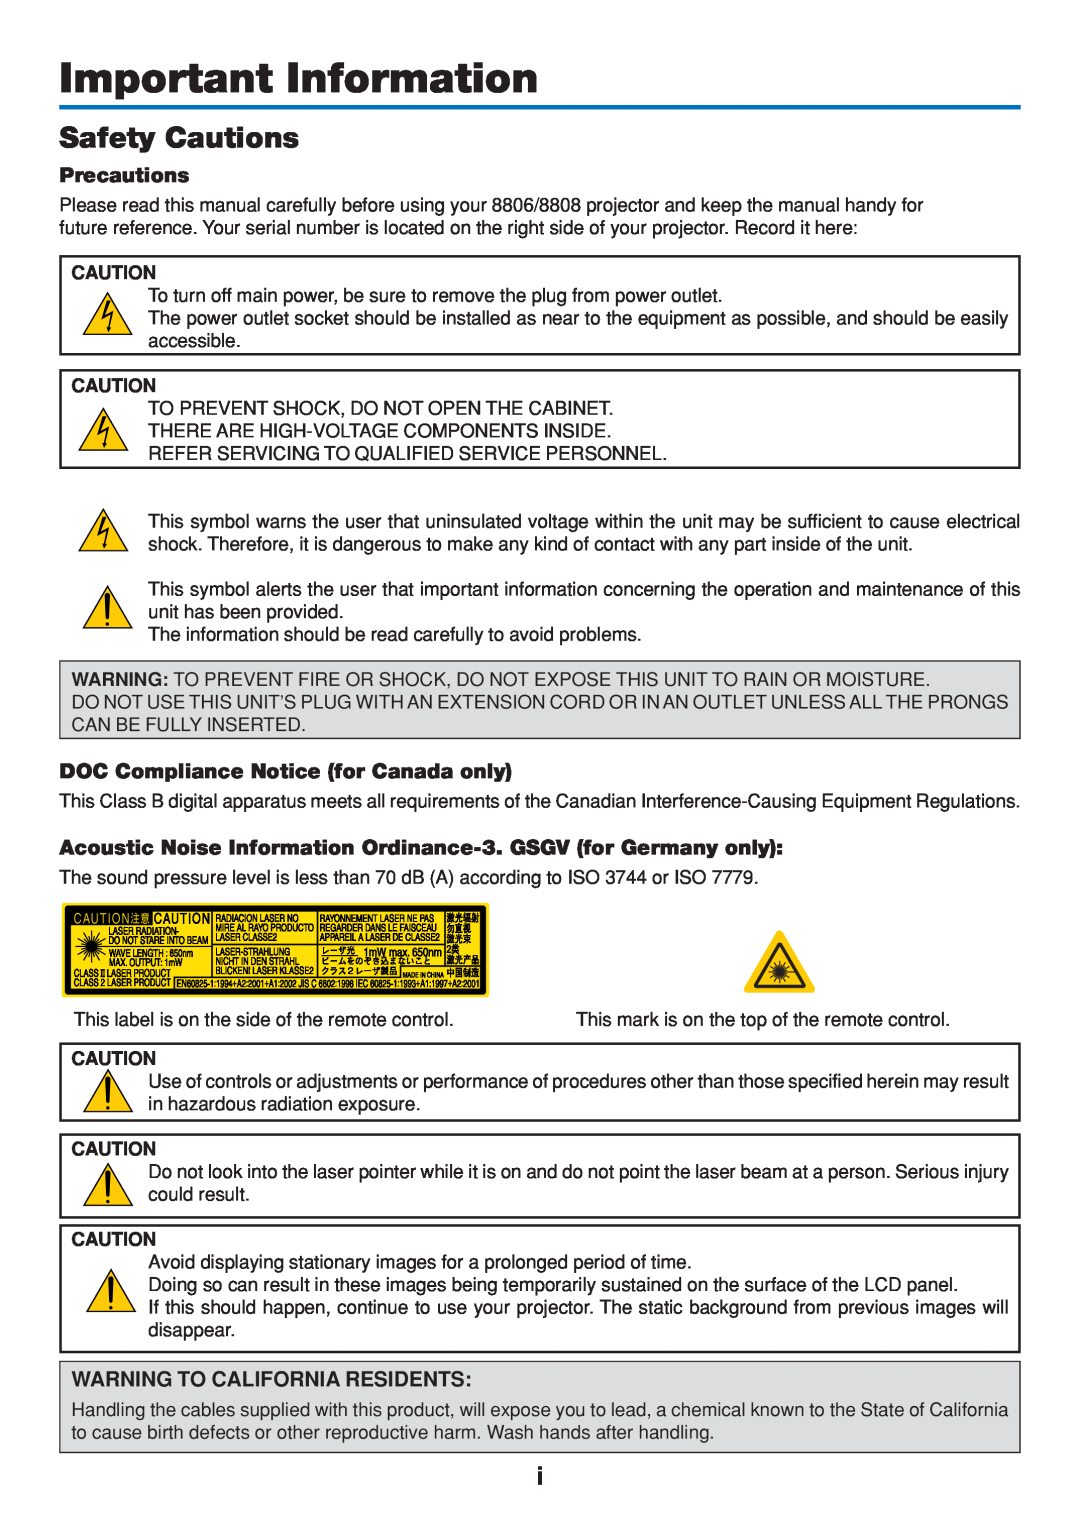 Dukane 8808 user manual Important Information, Safety Cautions, Precautions, DOC Compliance Notice for Canada only 